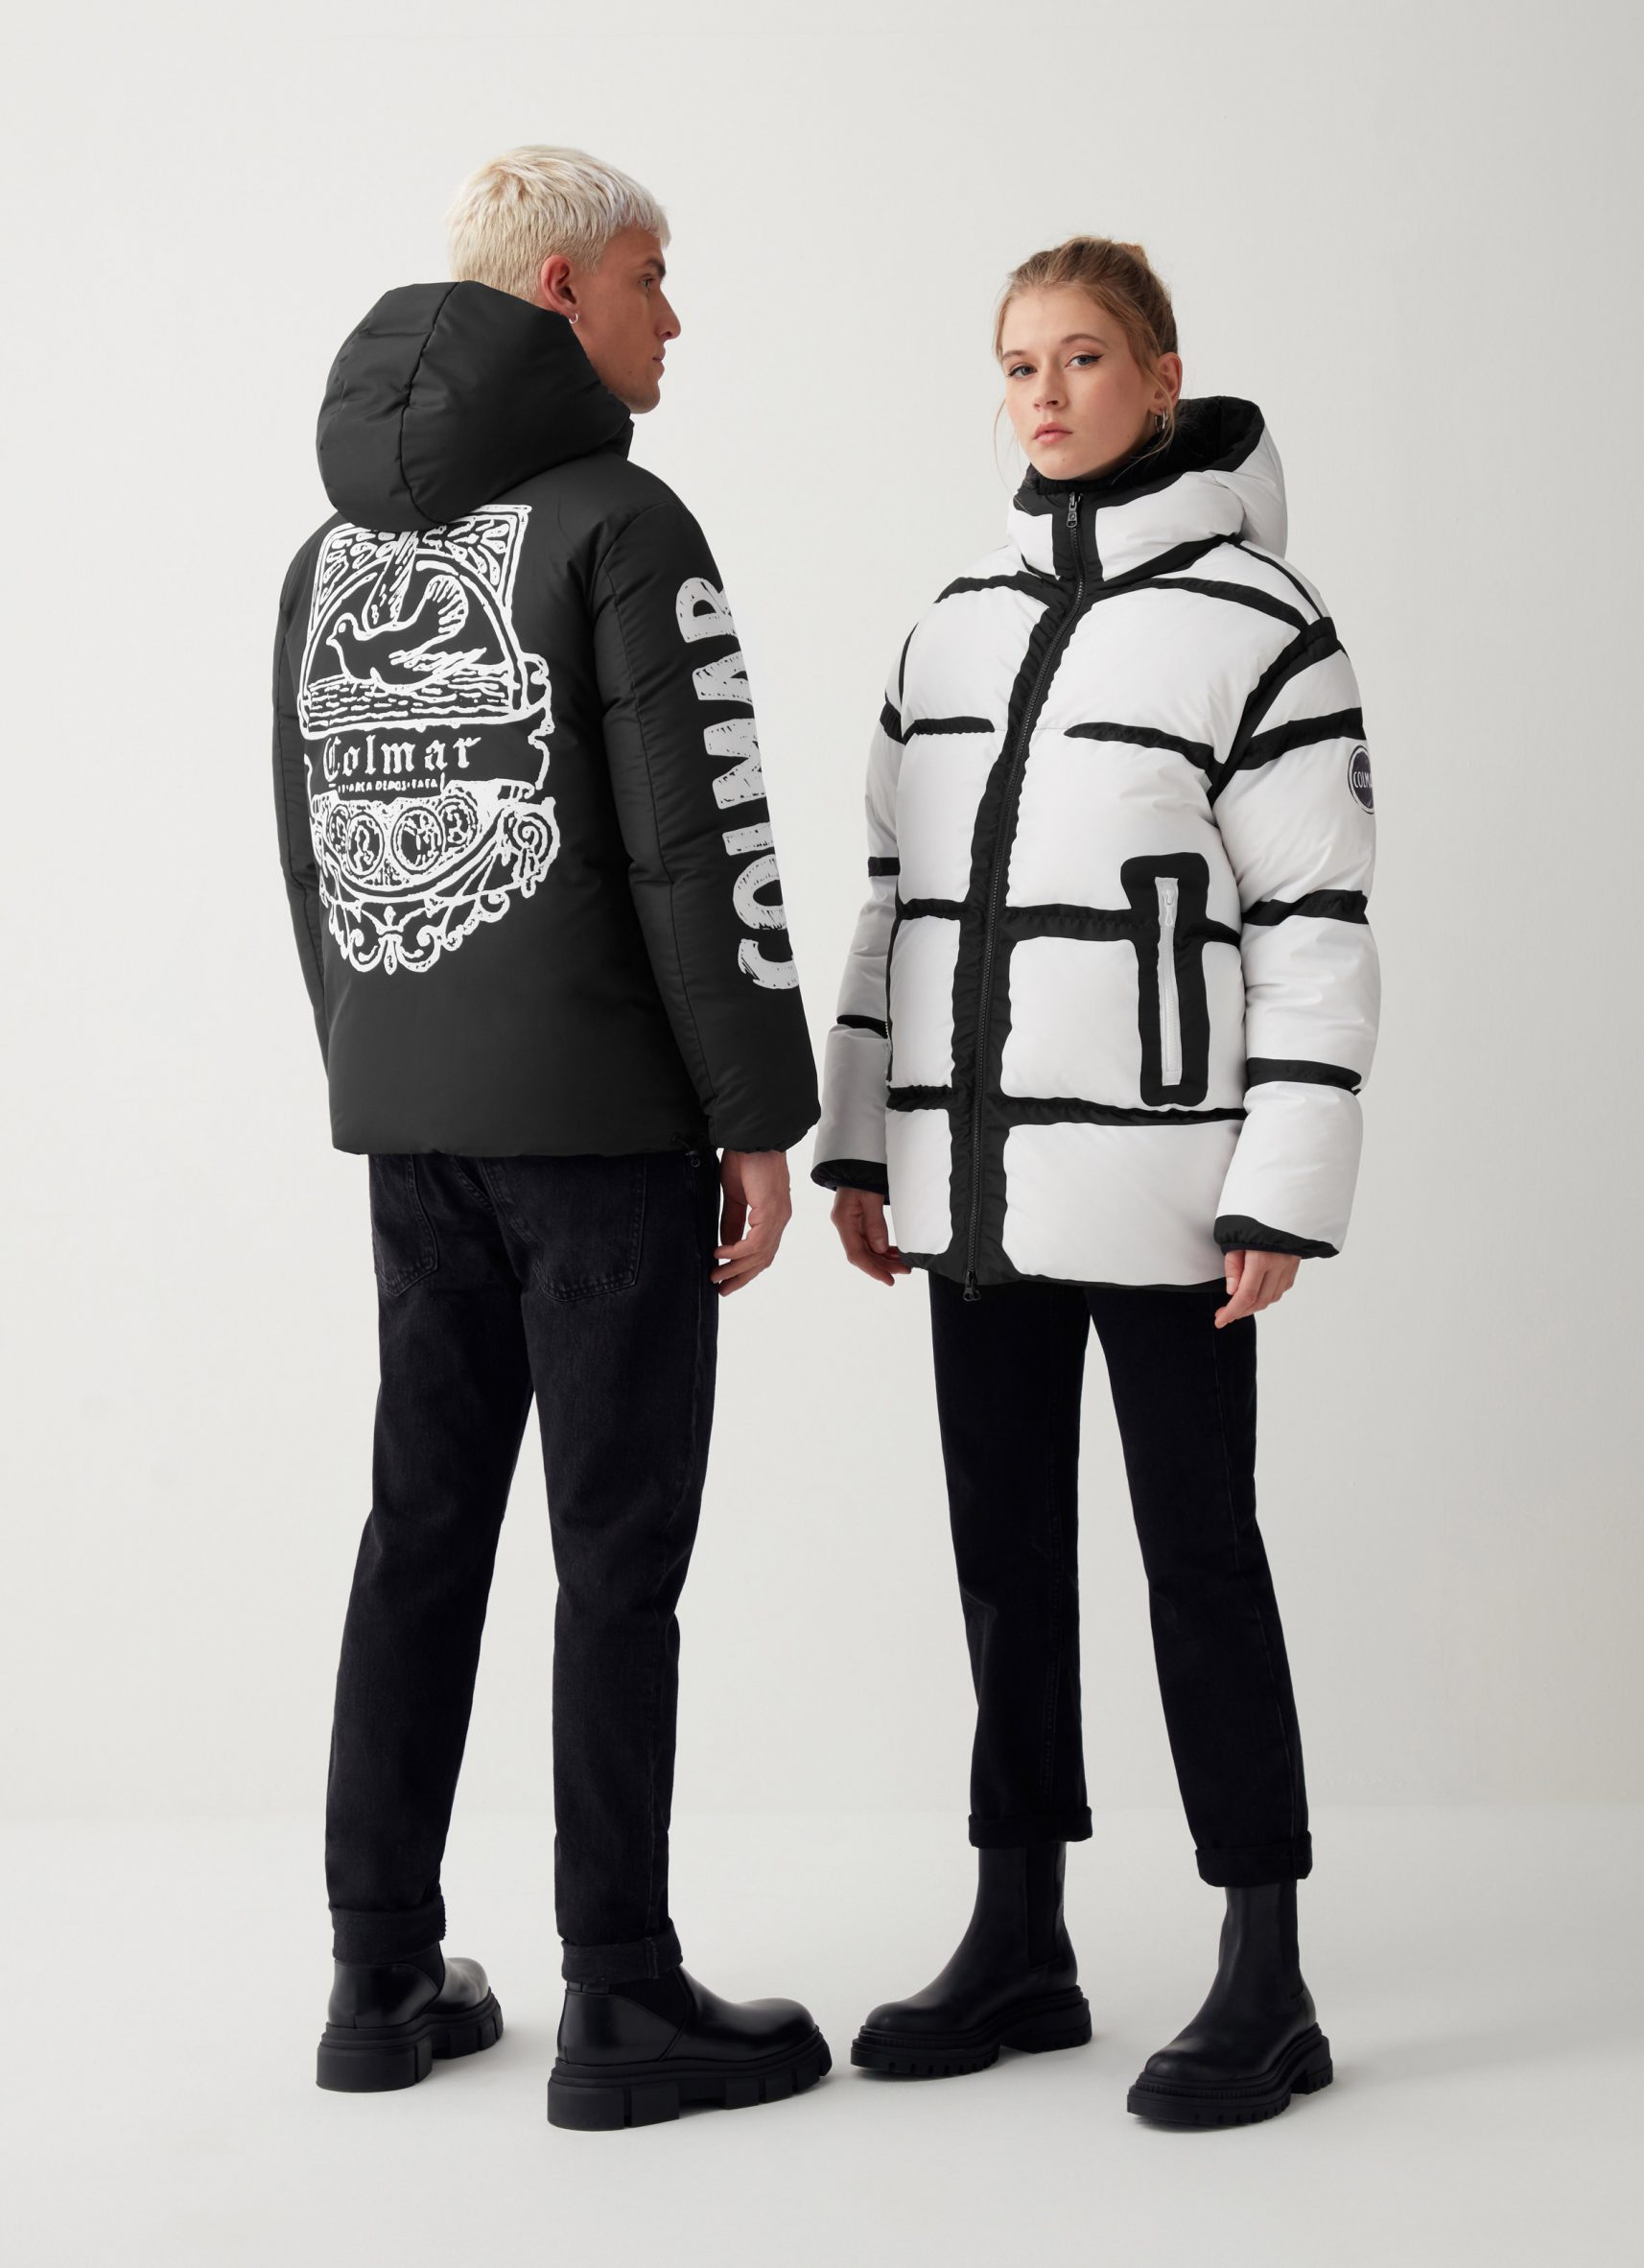 Two models wearing black and white ski jackets